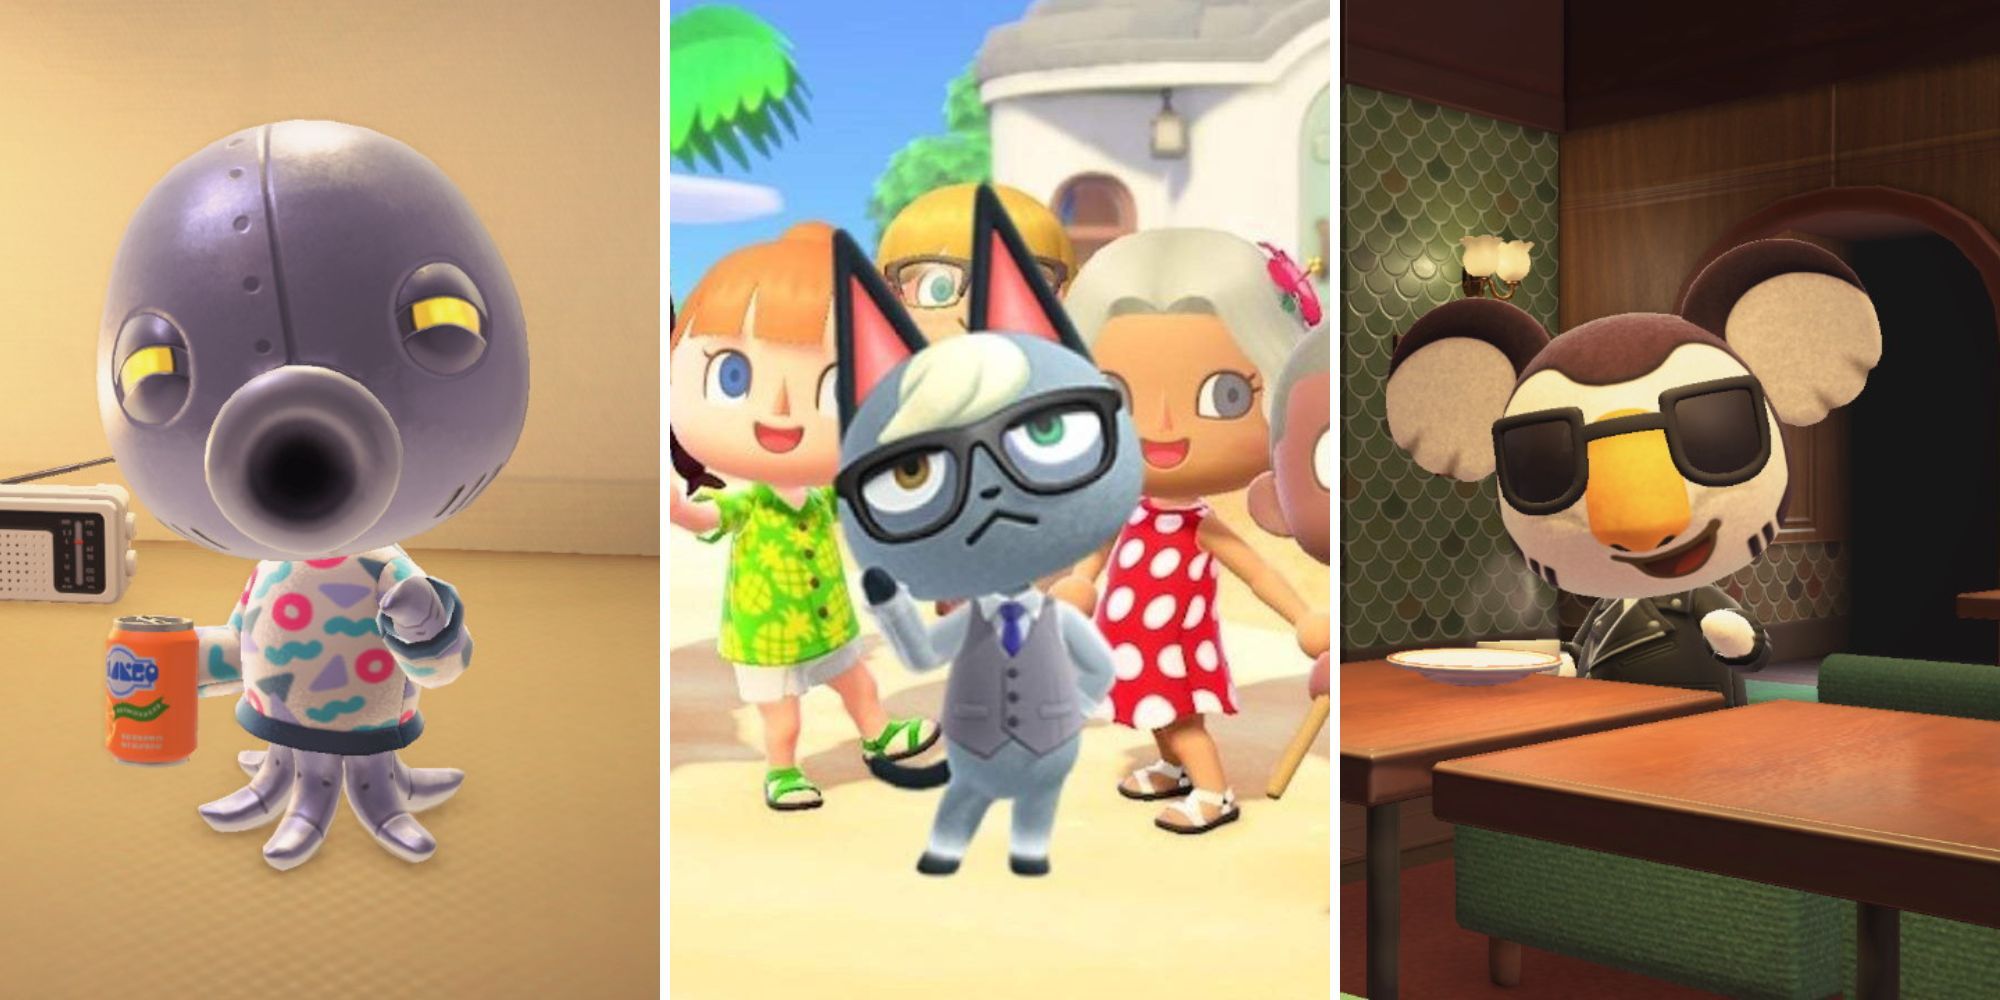 Cephalobot, a robotic octopus, holds a keg can in a tent, Raymond, a gray cat with glasses, stands in front of the villagers, Eugene, a brown and cream koala wearing shades, sits at a table.